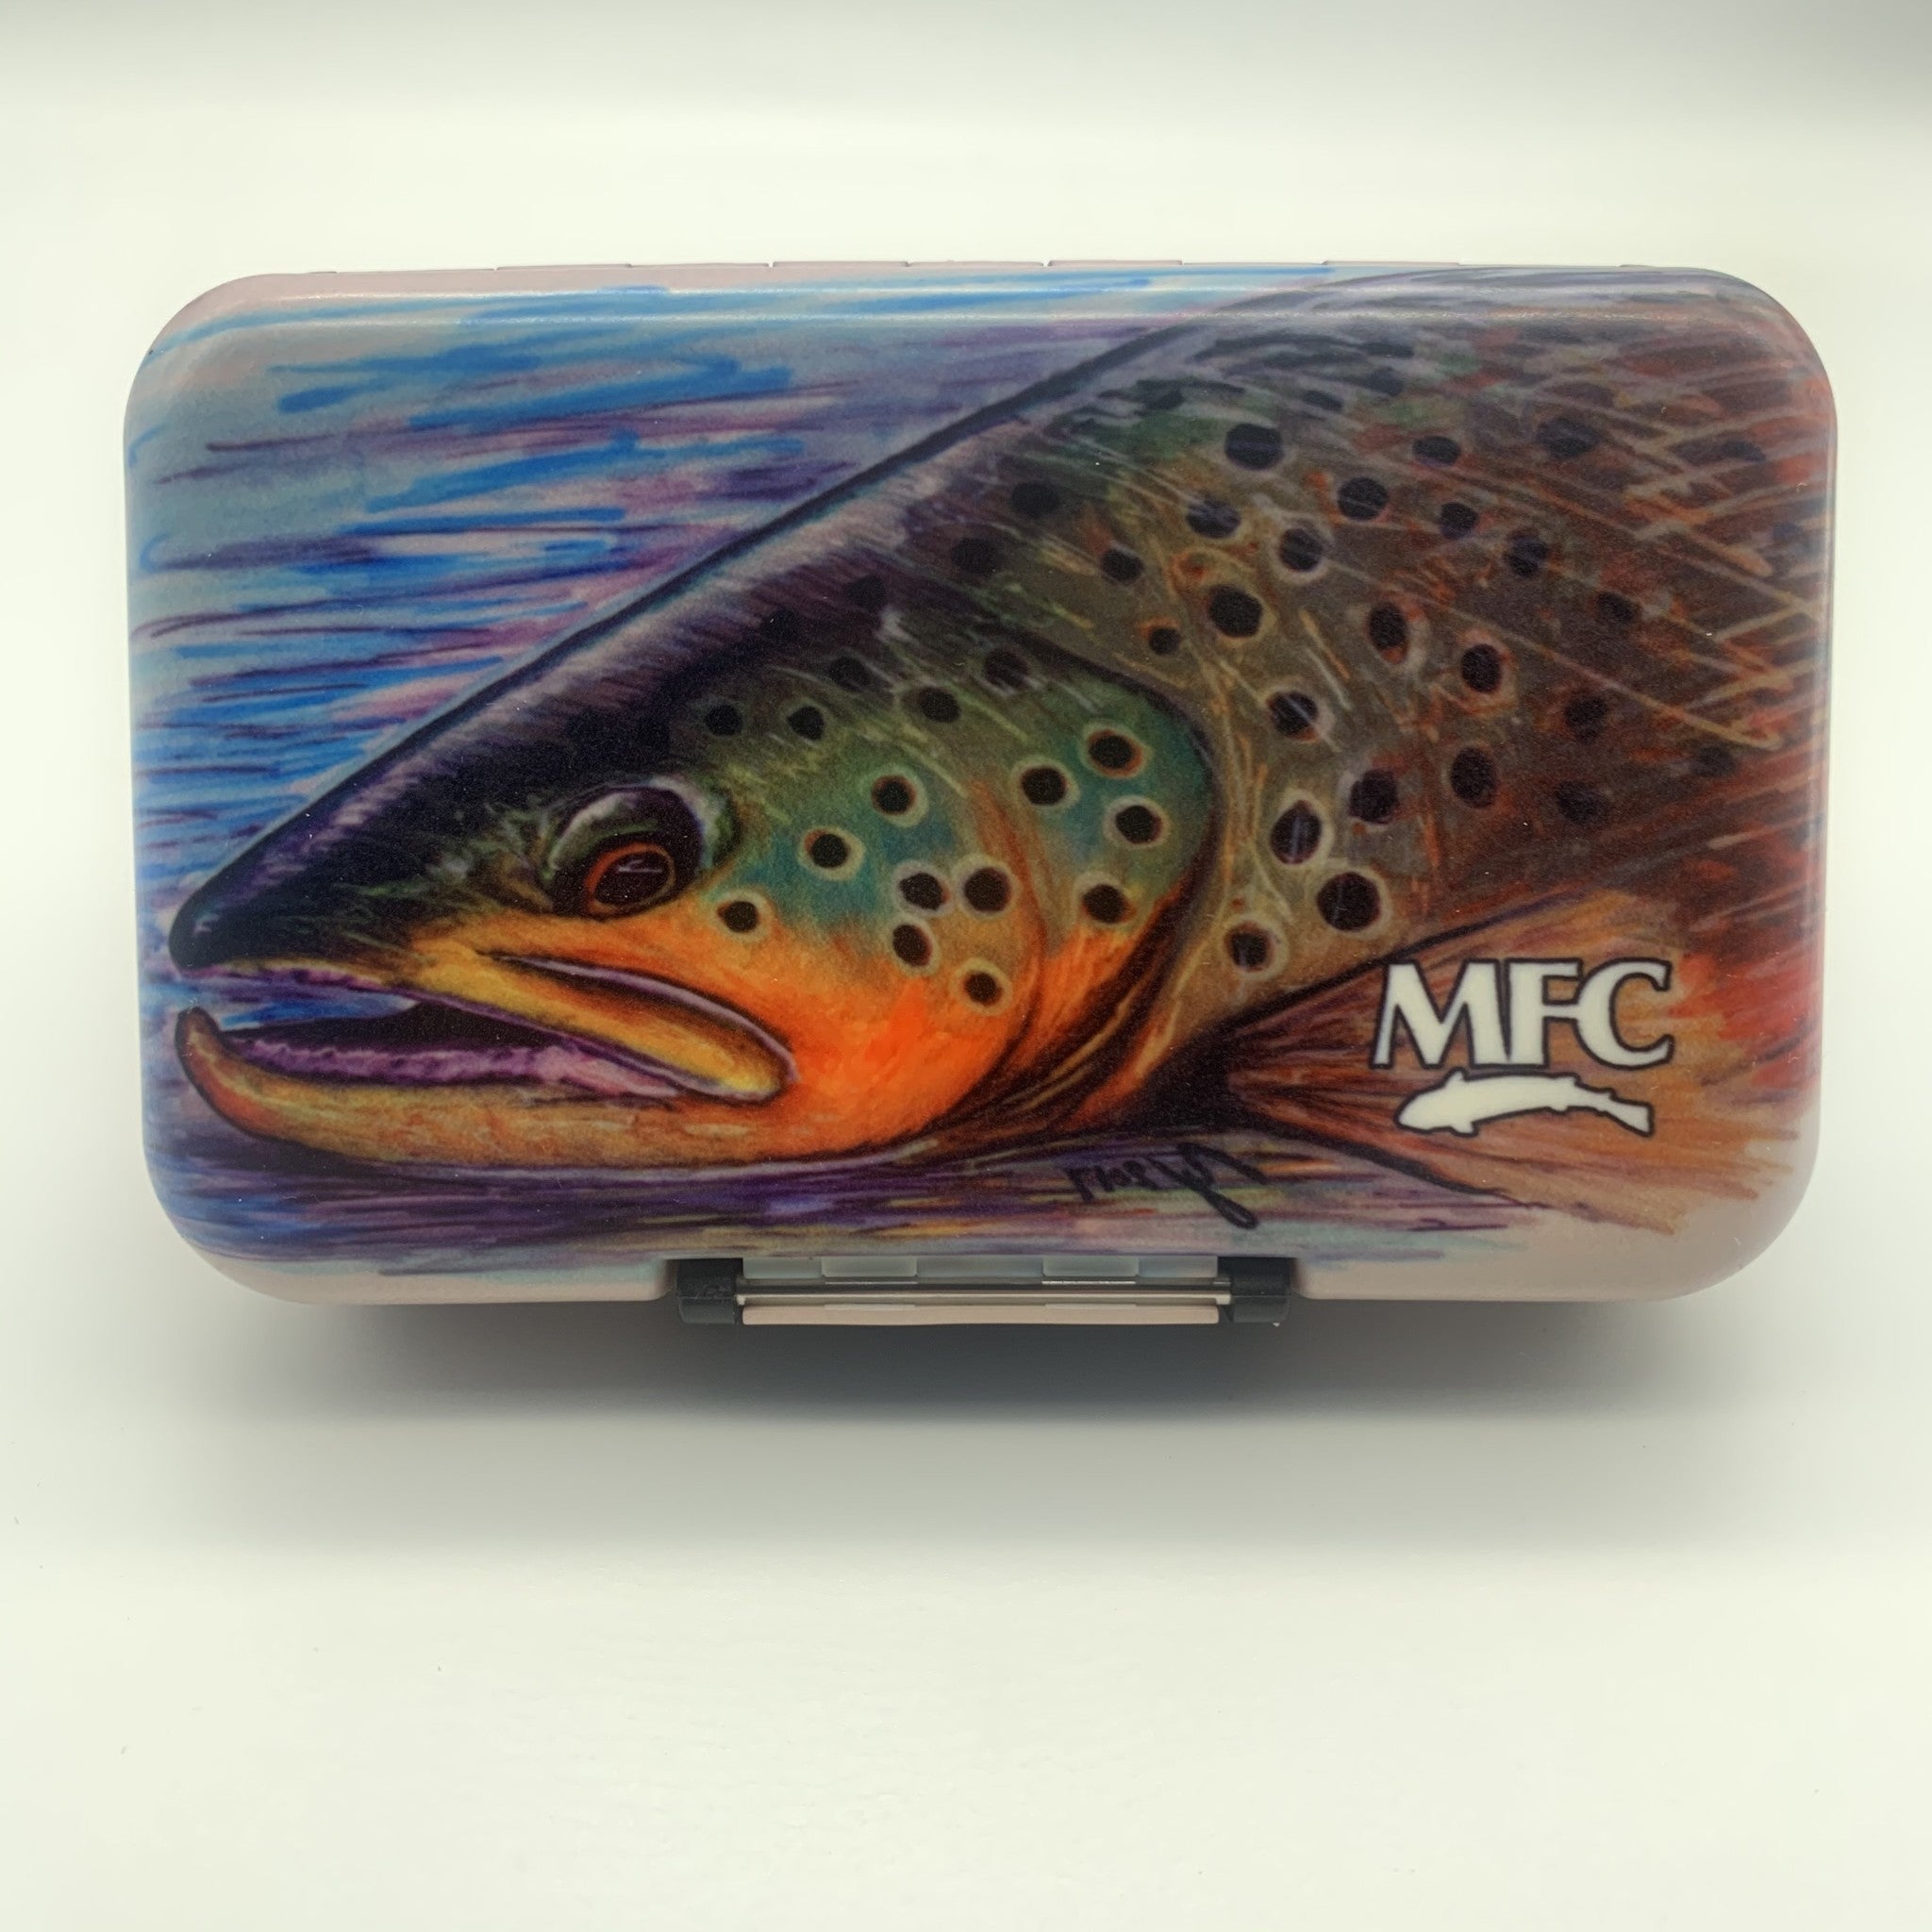 Mfc Poly Fly Box - Hallock's Brown Trout